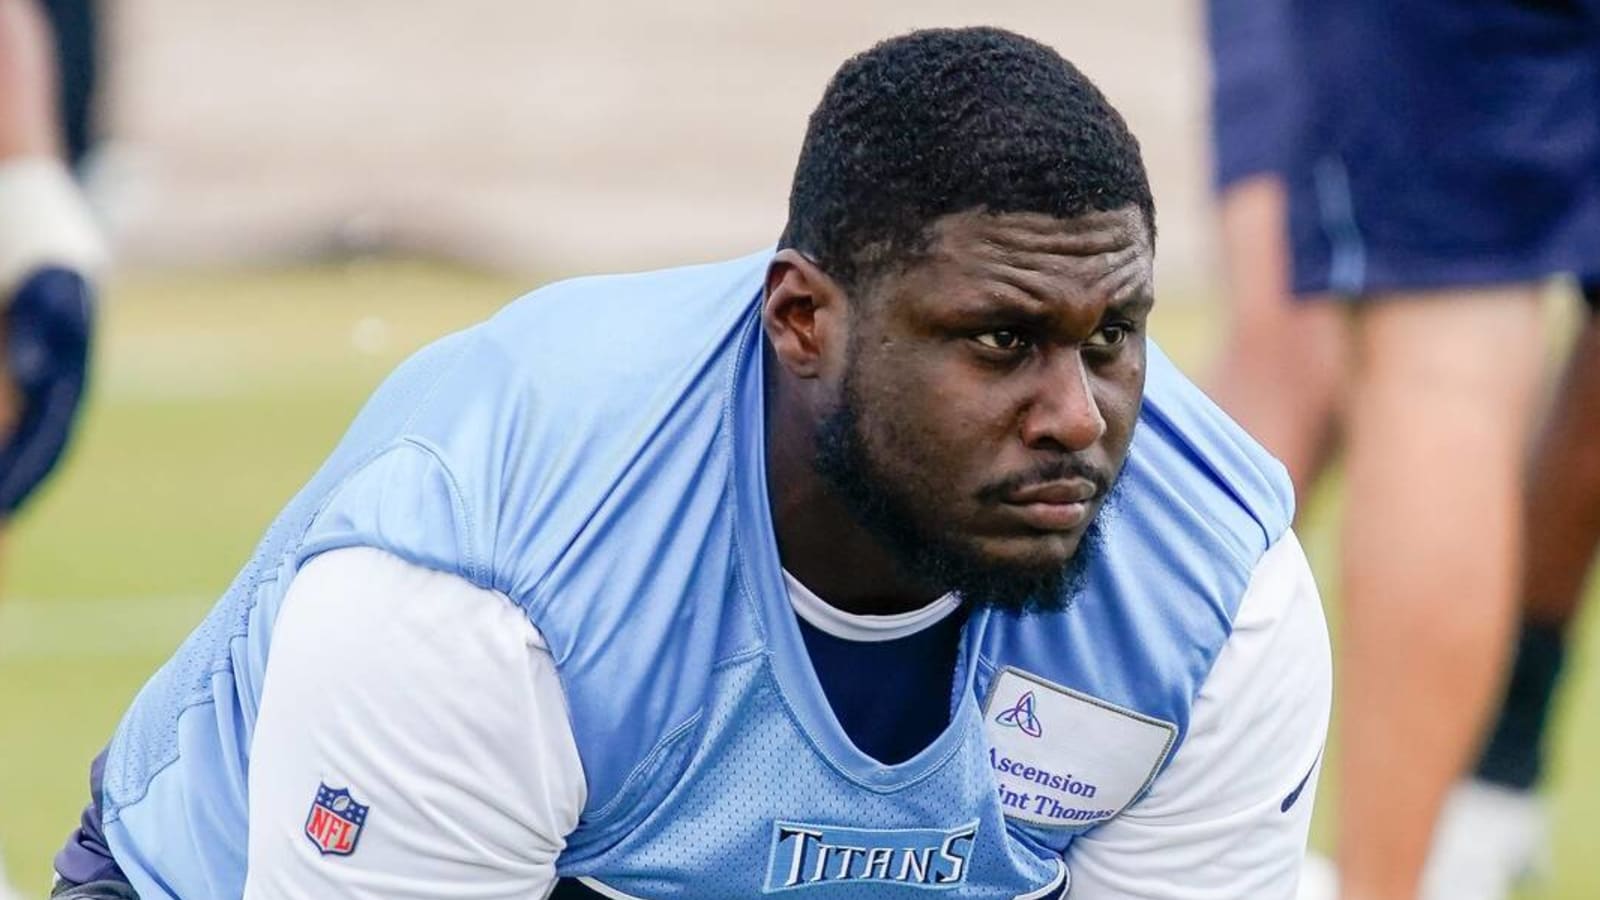 Defensive lineman puts Titans on blast hours after being released